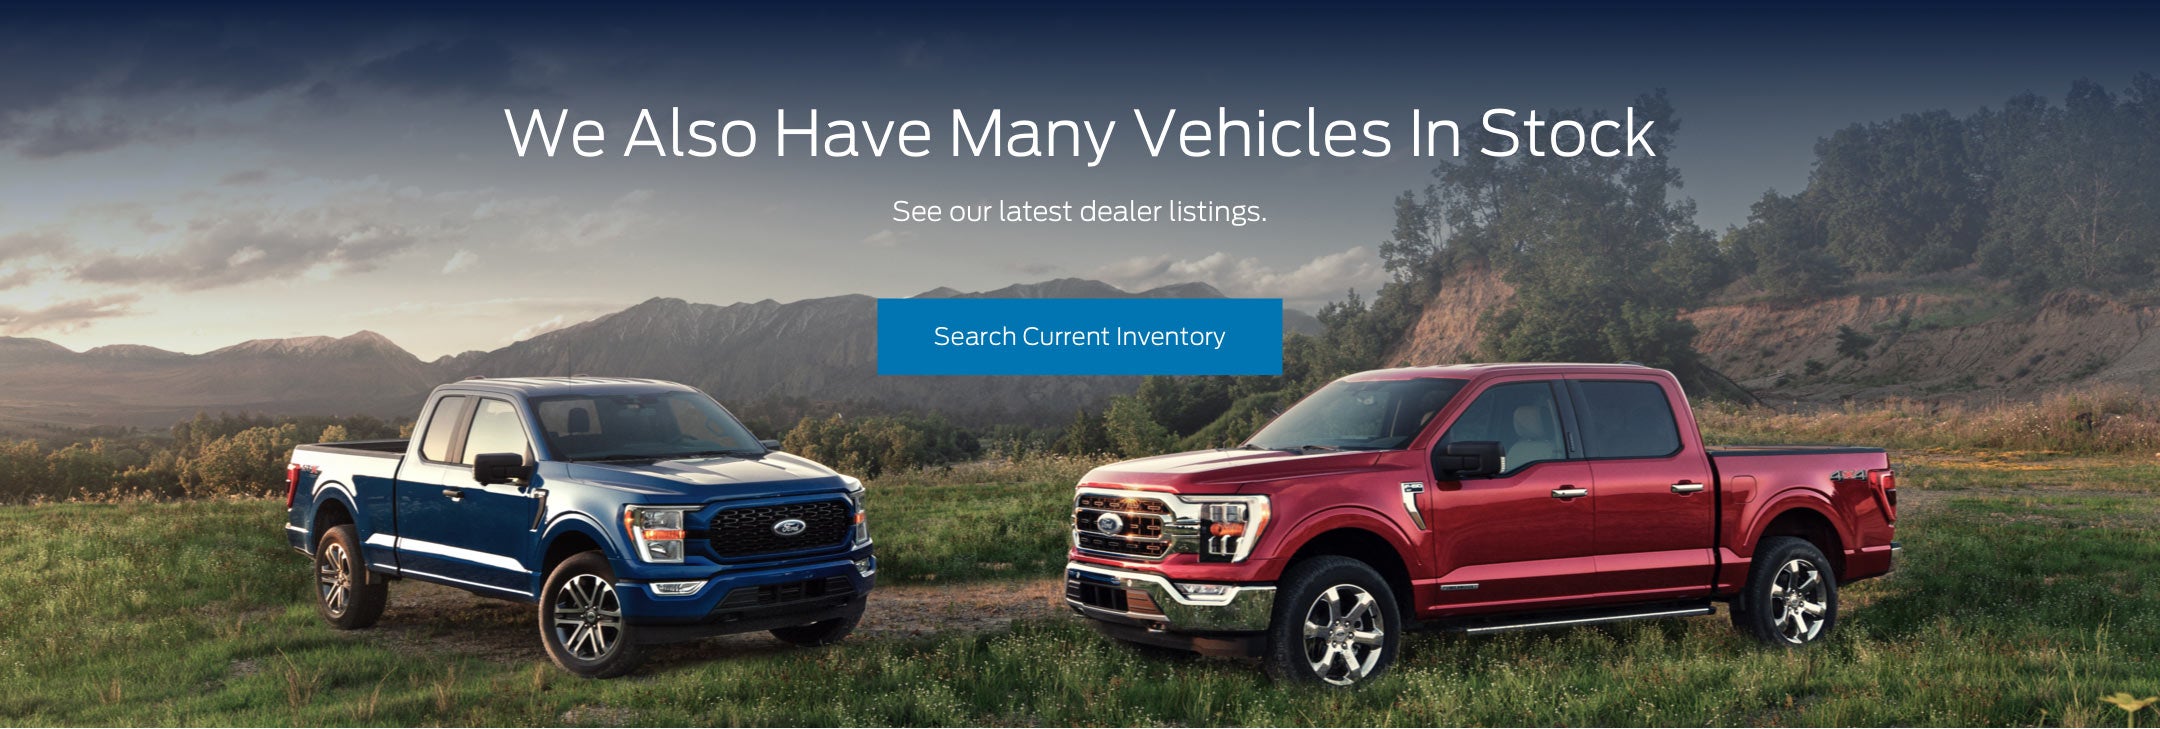 Ford vehicles in stock | Rogers Ford Sales in Midland TX